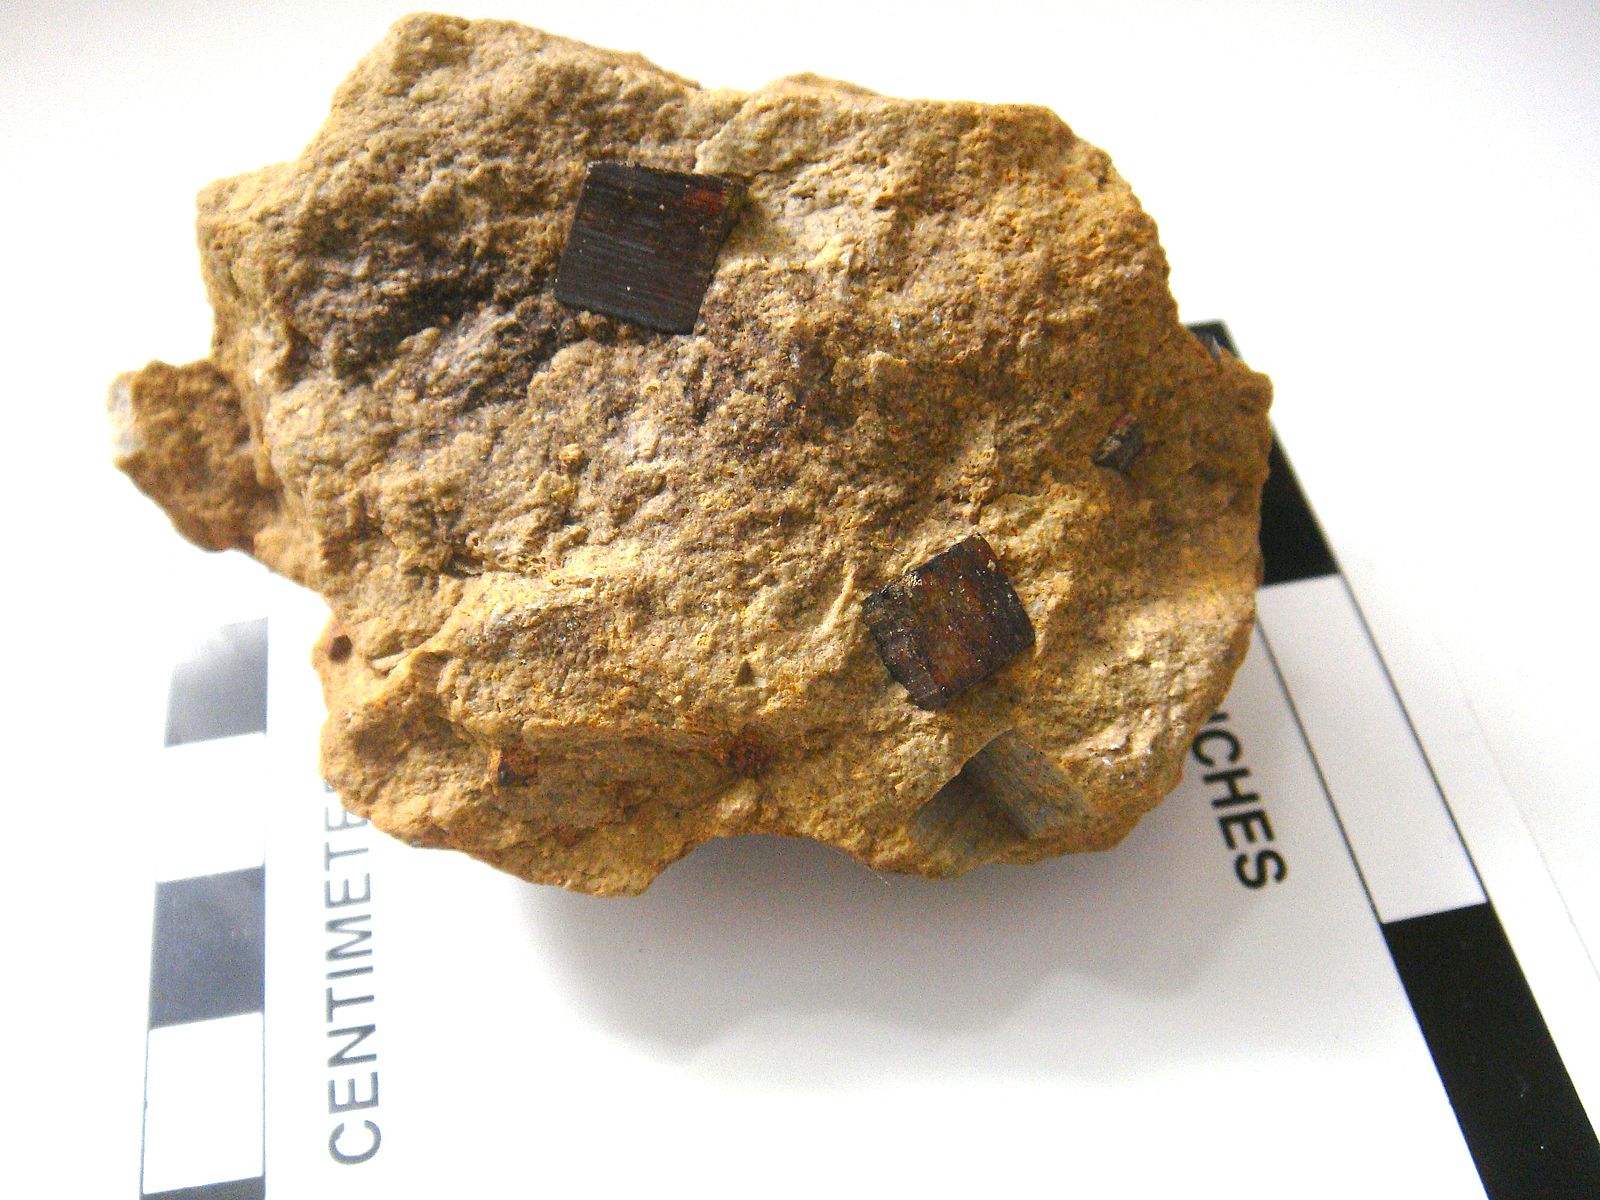 Chunk of dull tan rock with two dark brown glassy cubic crystals growing from it.